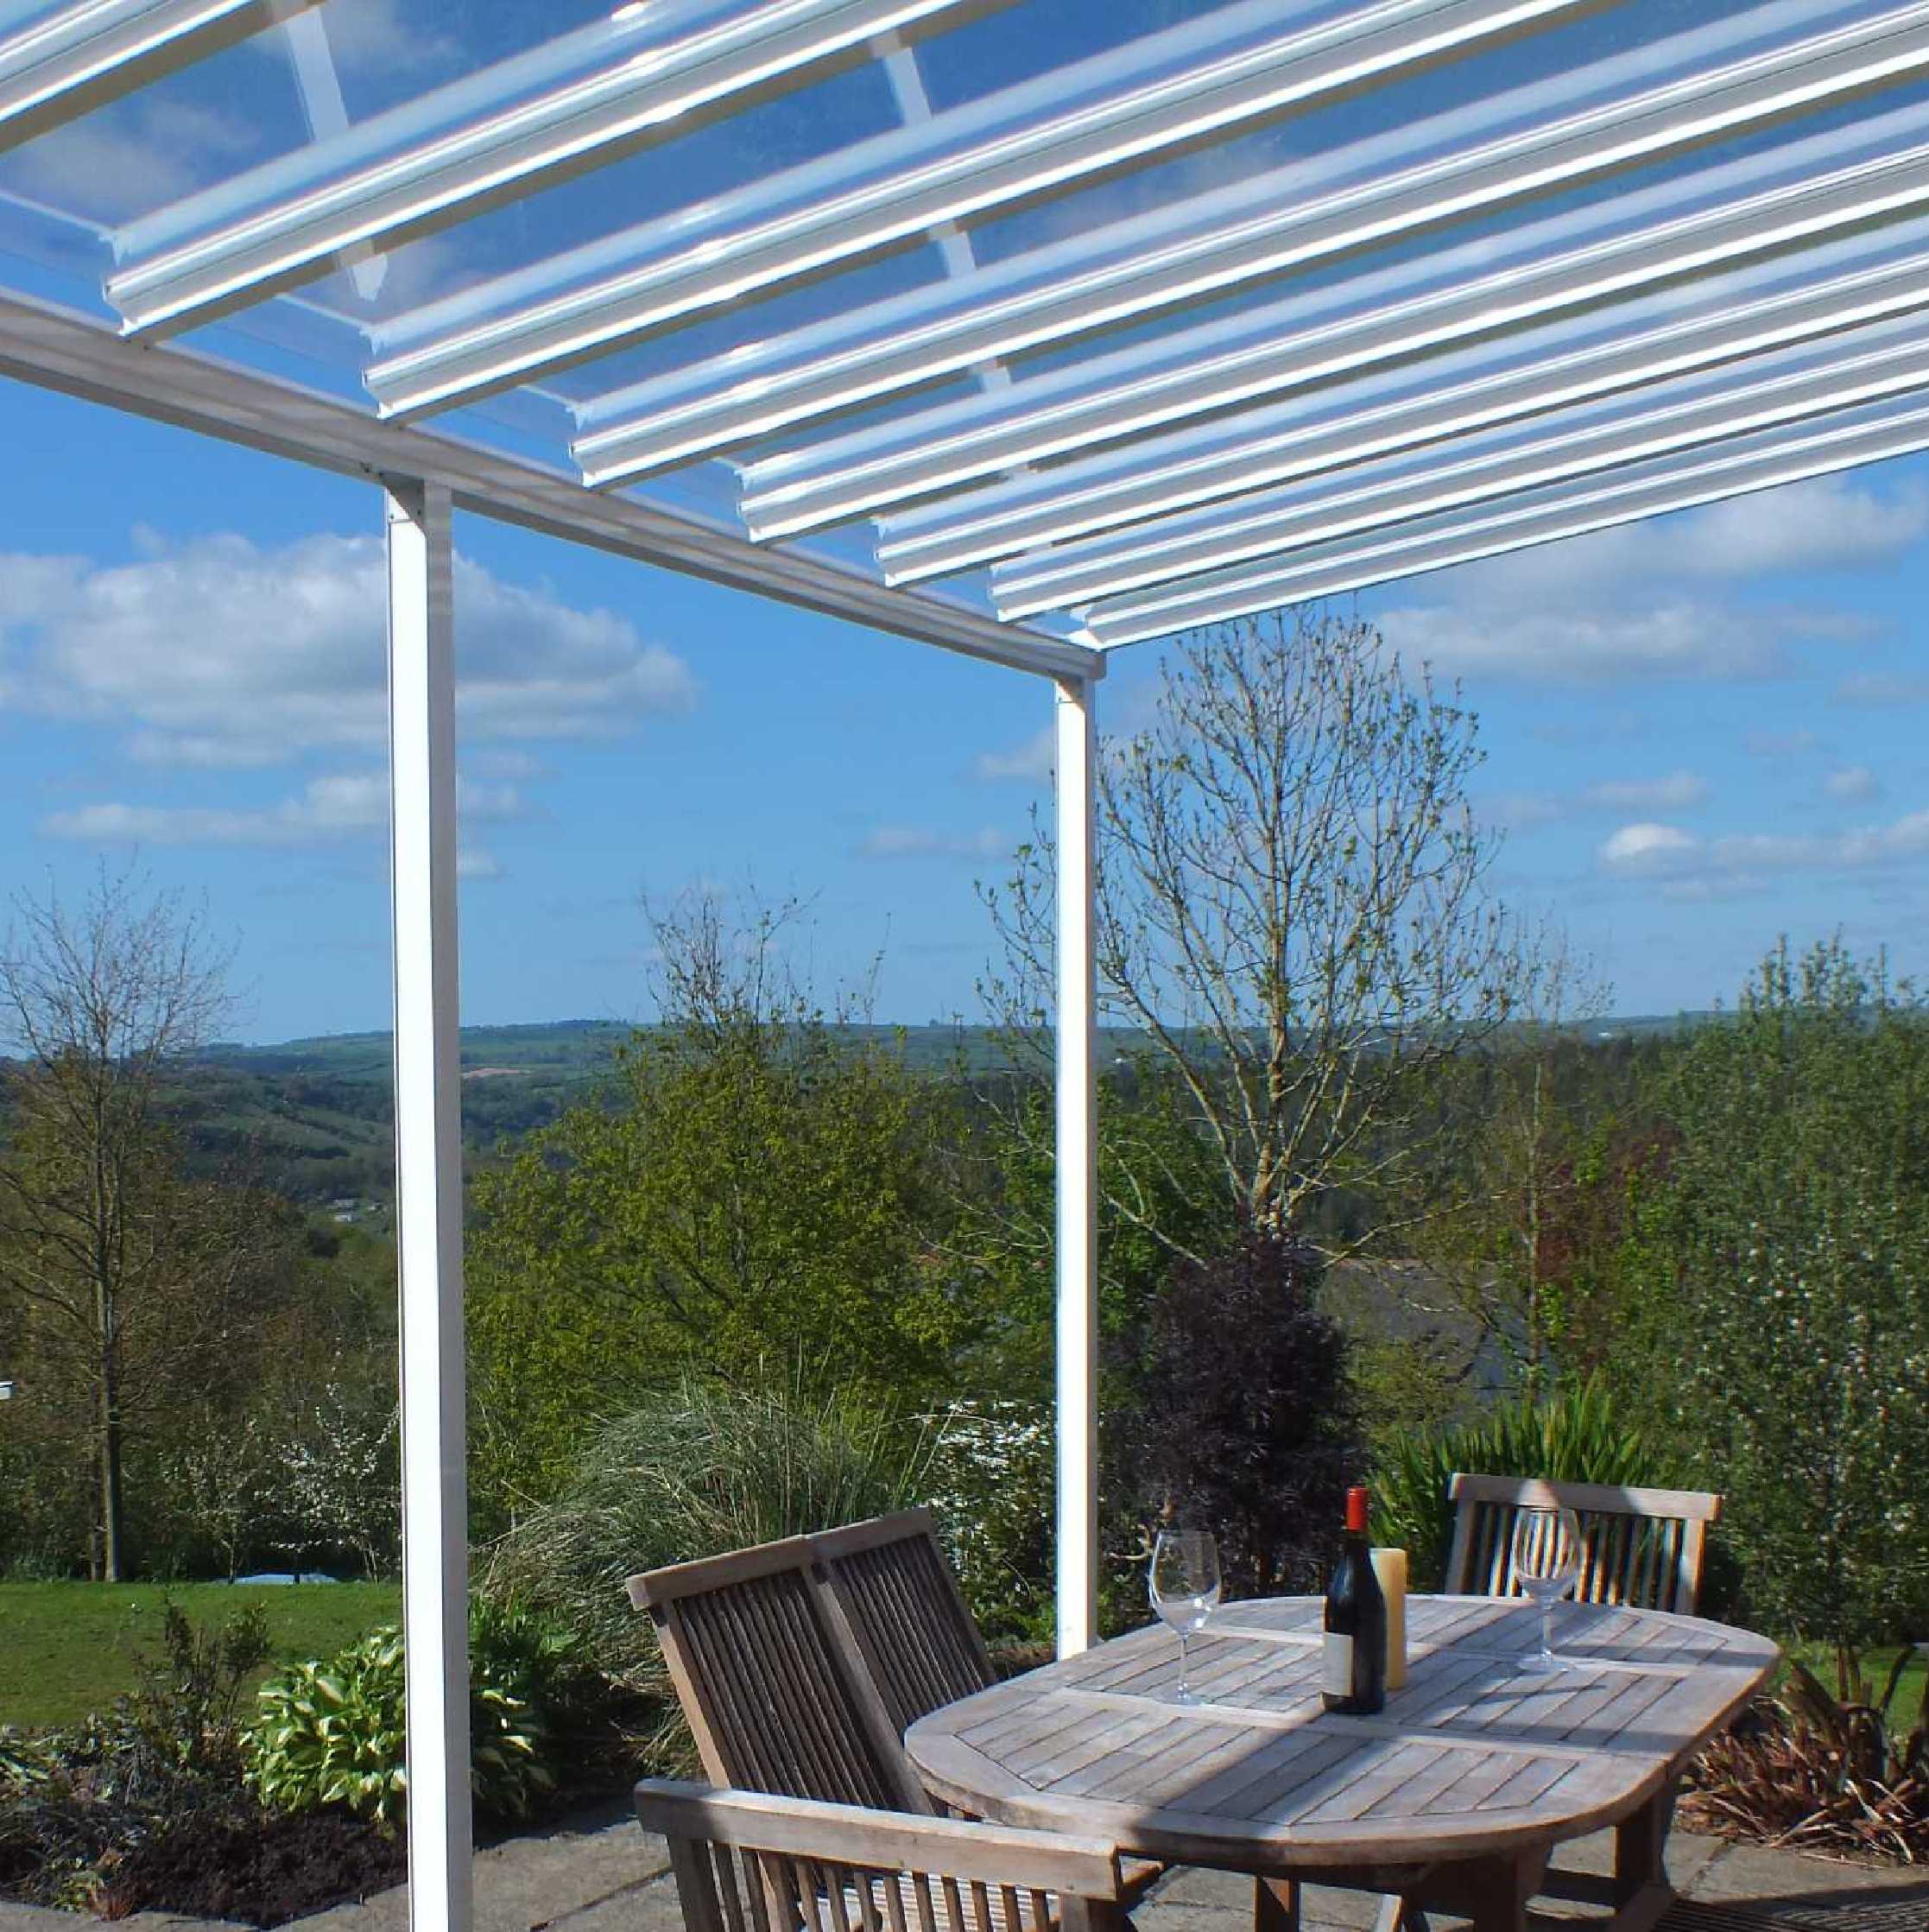 Buy Omega Smart Lean-To Canopy, White UNGLAZED for 6mm Glazing - 9.8m (W) x 2.5m (P), (5) Supporting Posts online today